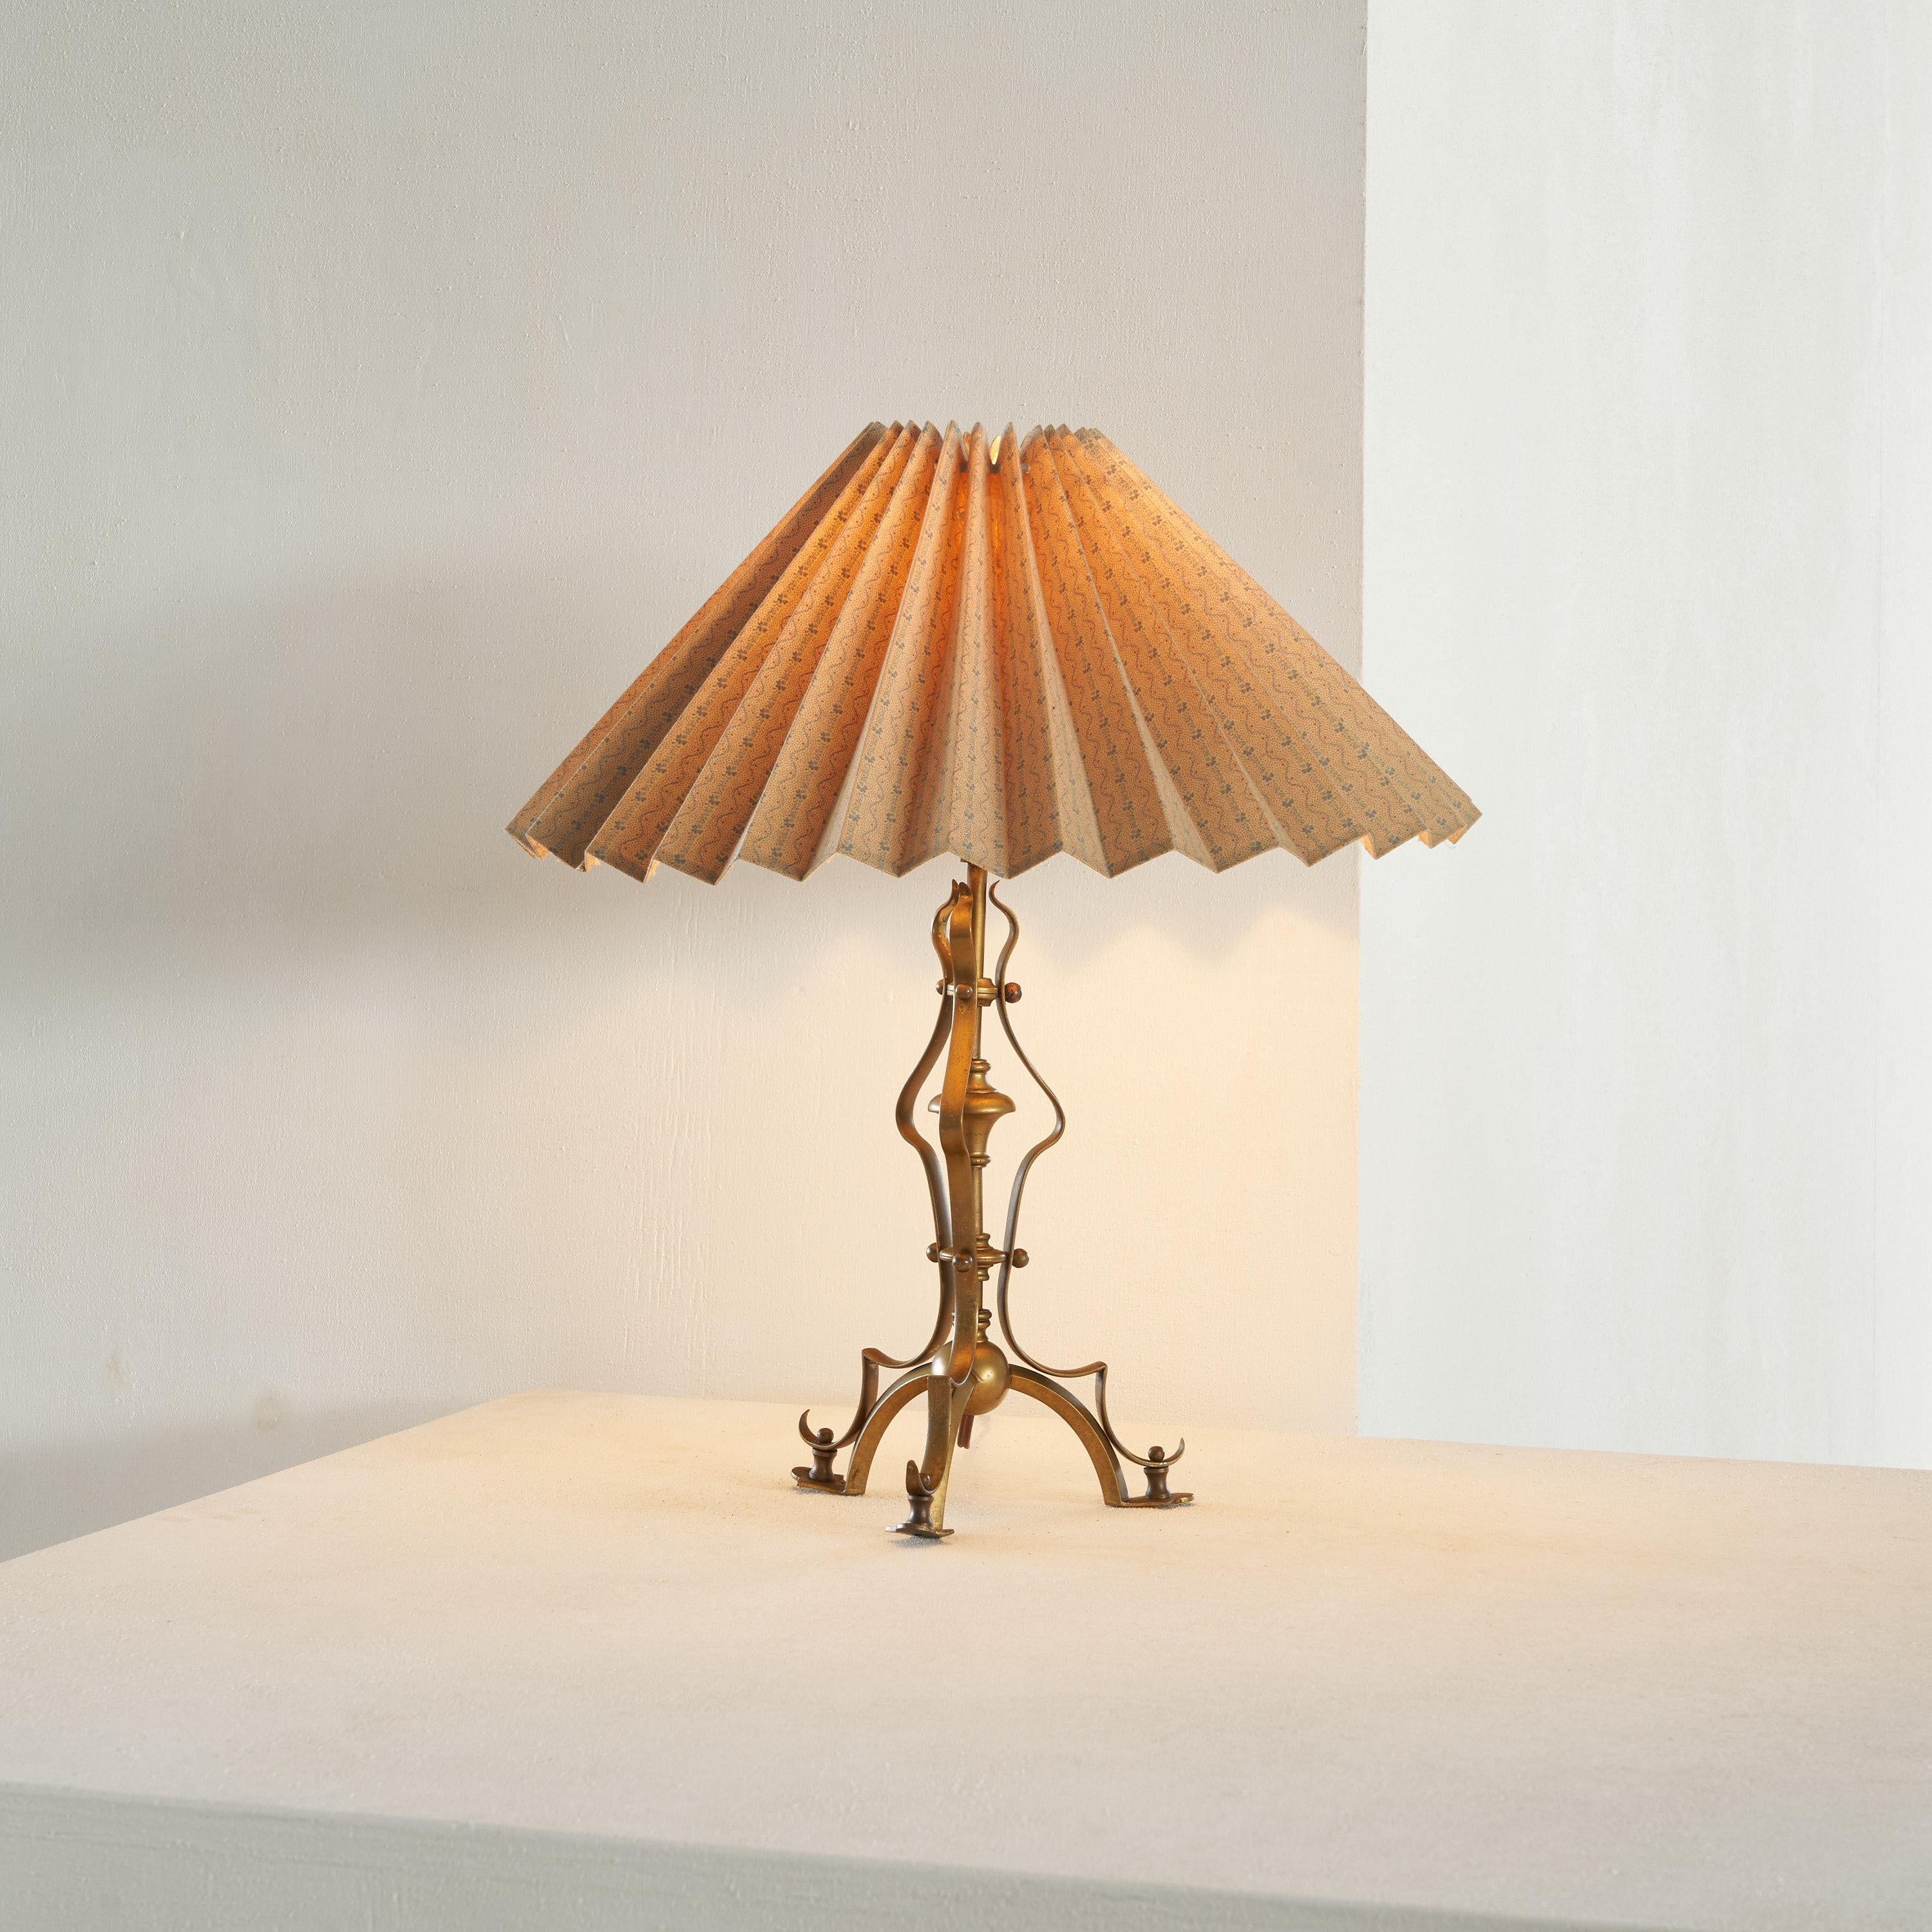 Art Nouveau table lamp in Patinated Brass with Plissé Shade. Early 20th century.

Wonderful art nouveau table lamp with an unusual design. This table lamp in patinated brass is very art nouveau with its curvy and floral shapes and sharp edges. A